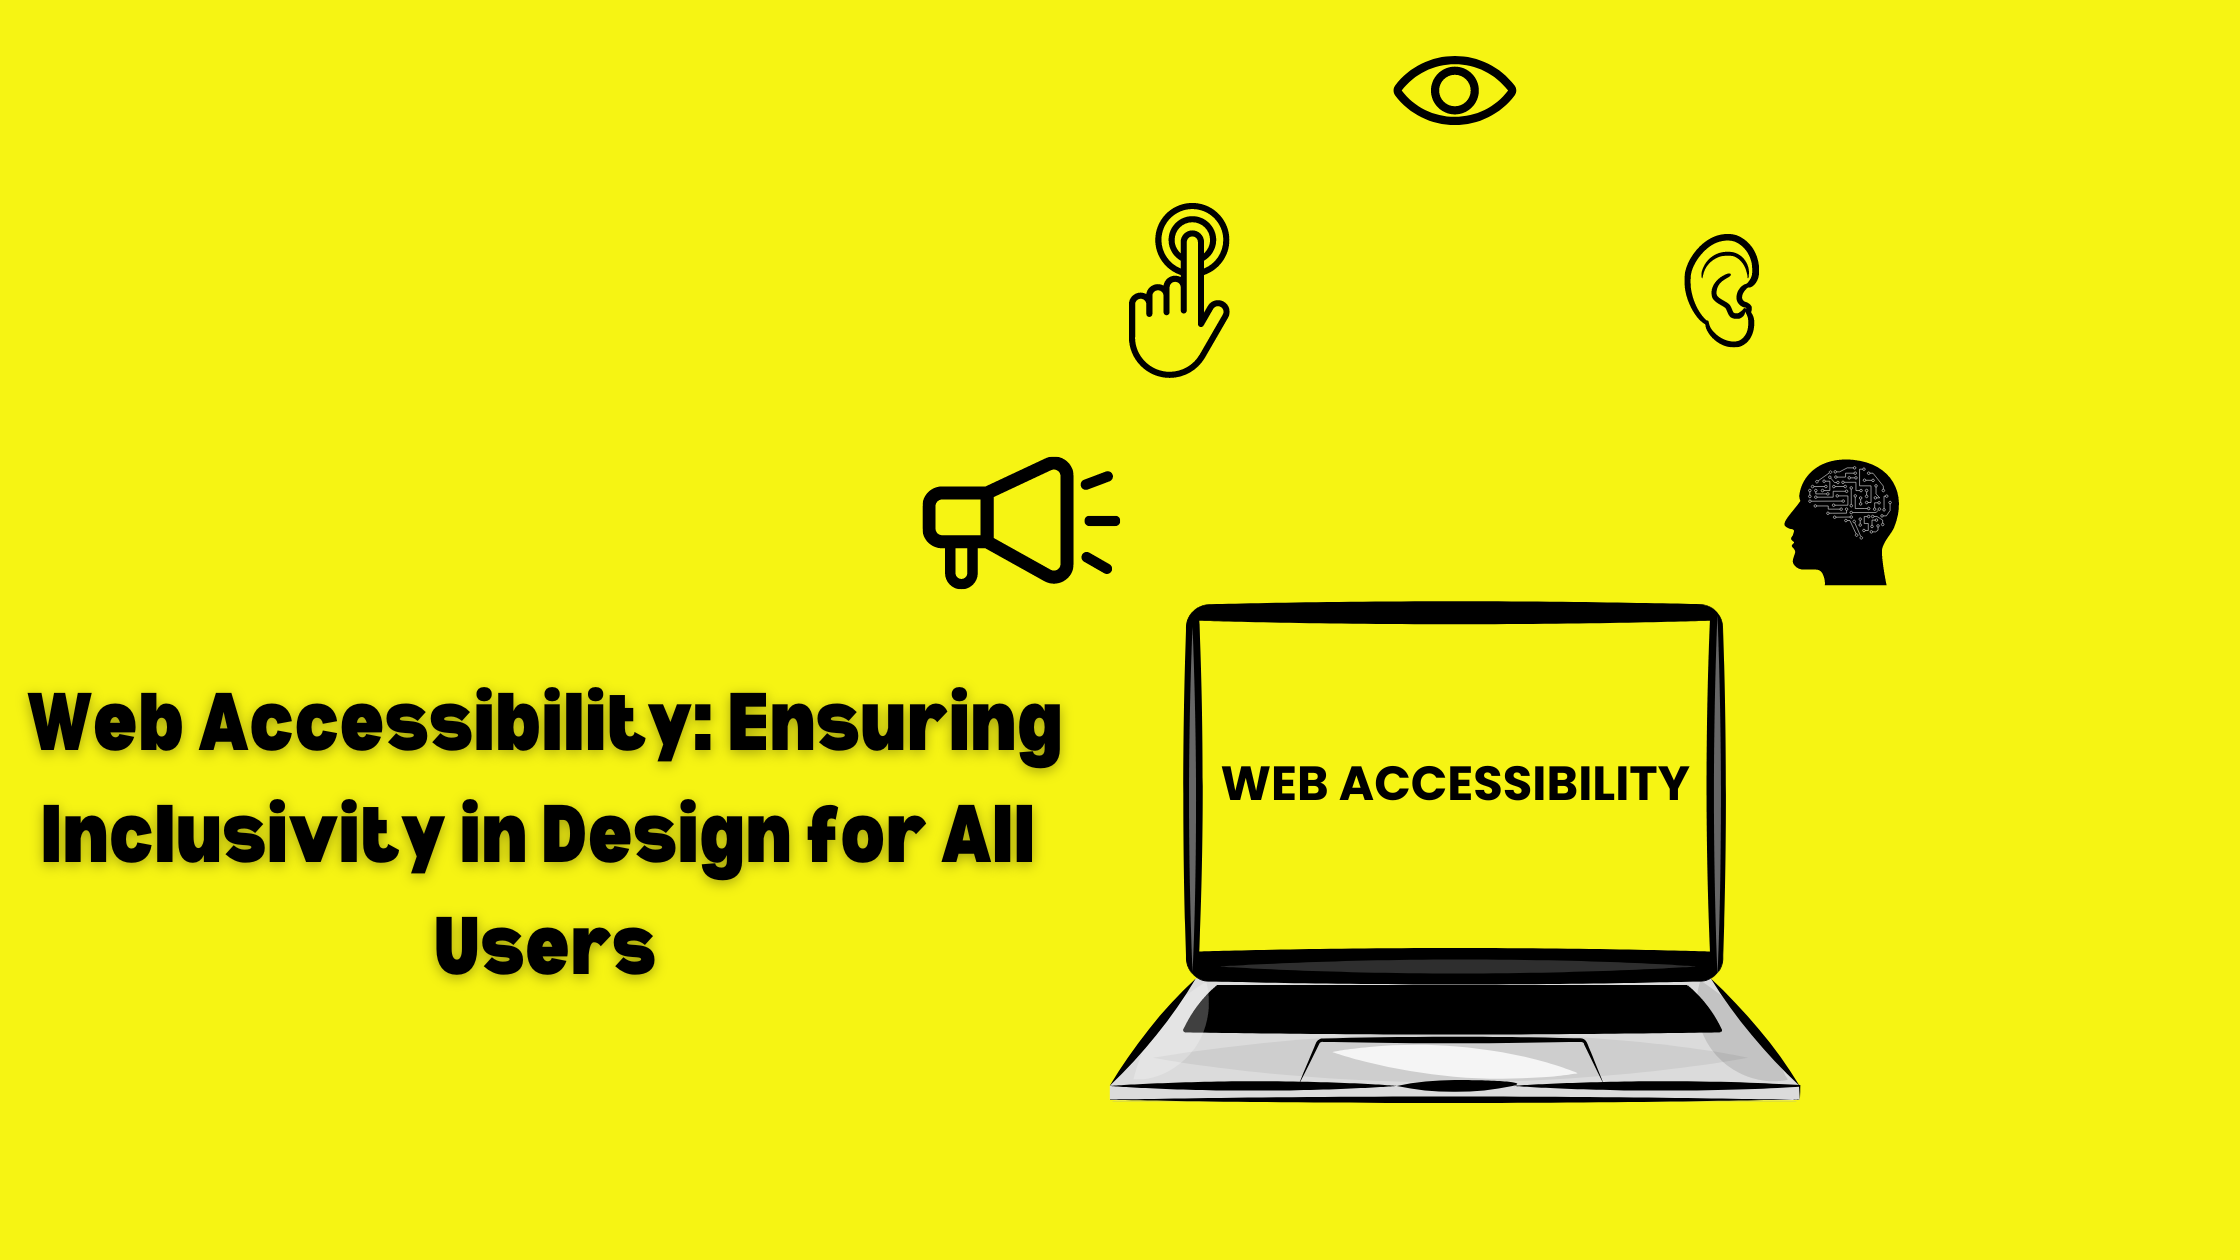 Web Accessibility: Ensuring Inclusivity in Design for All Users